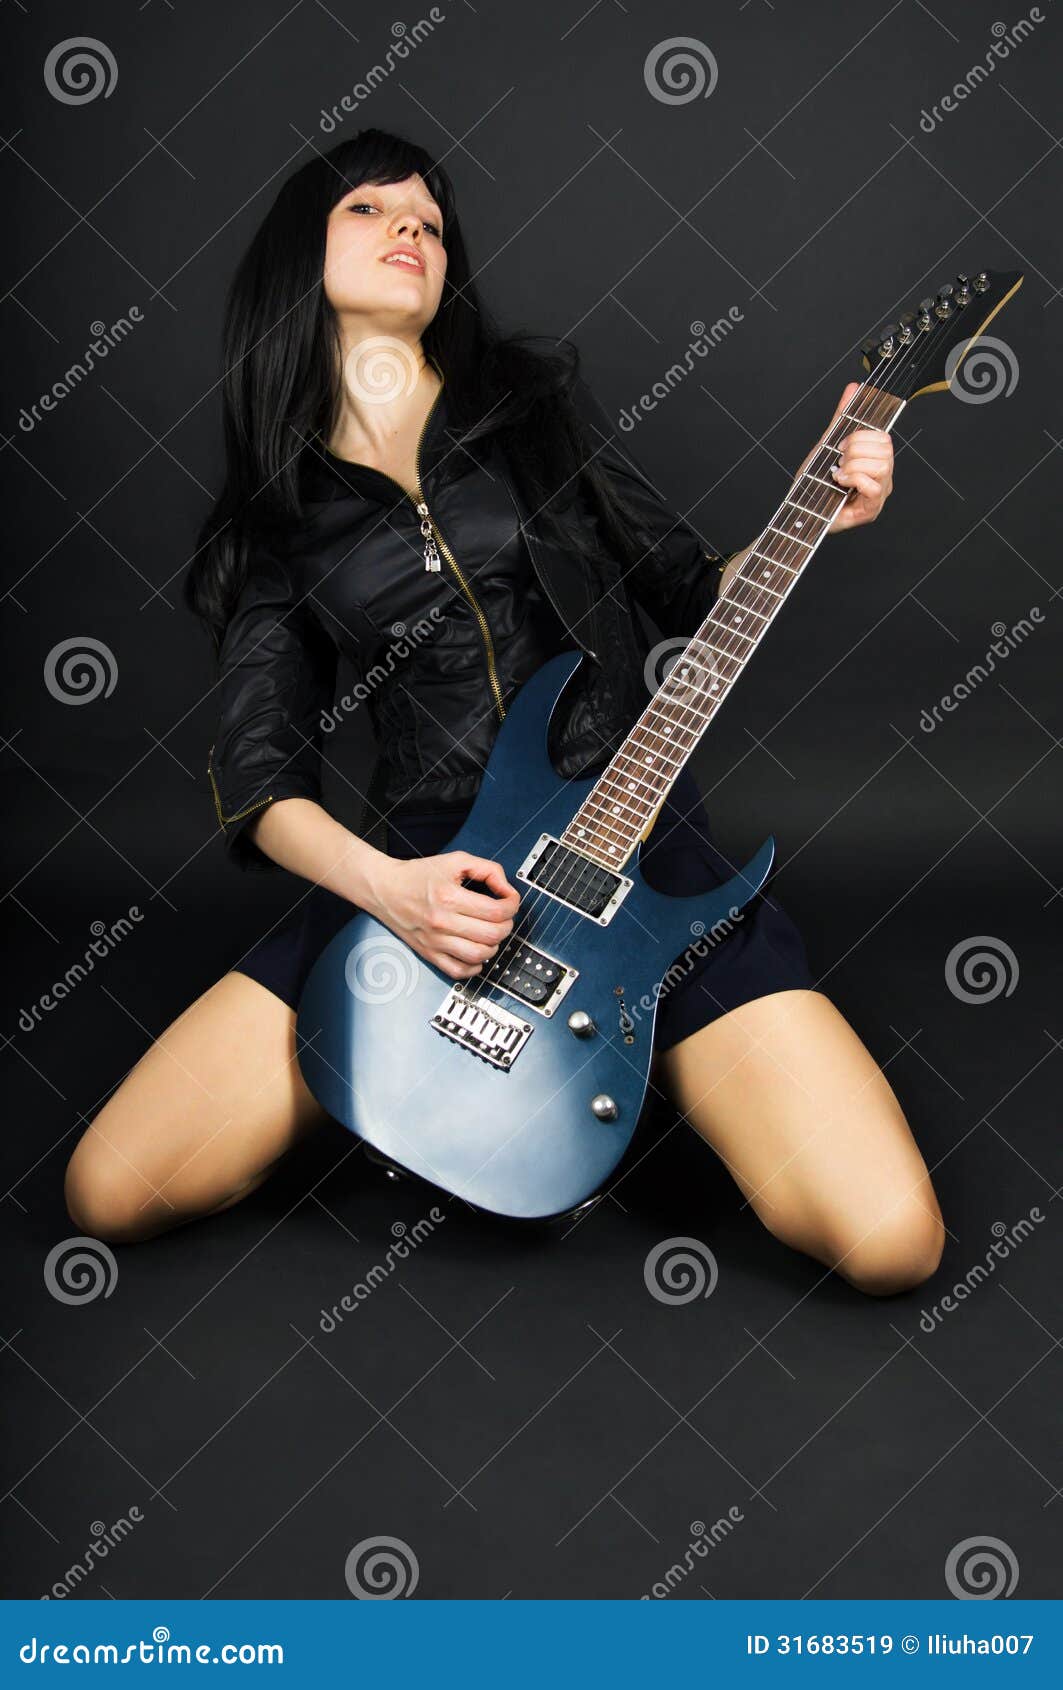 girl playing guitar clipart - photo #39